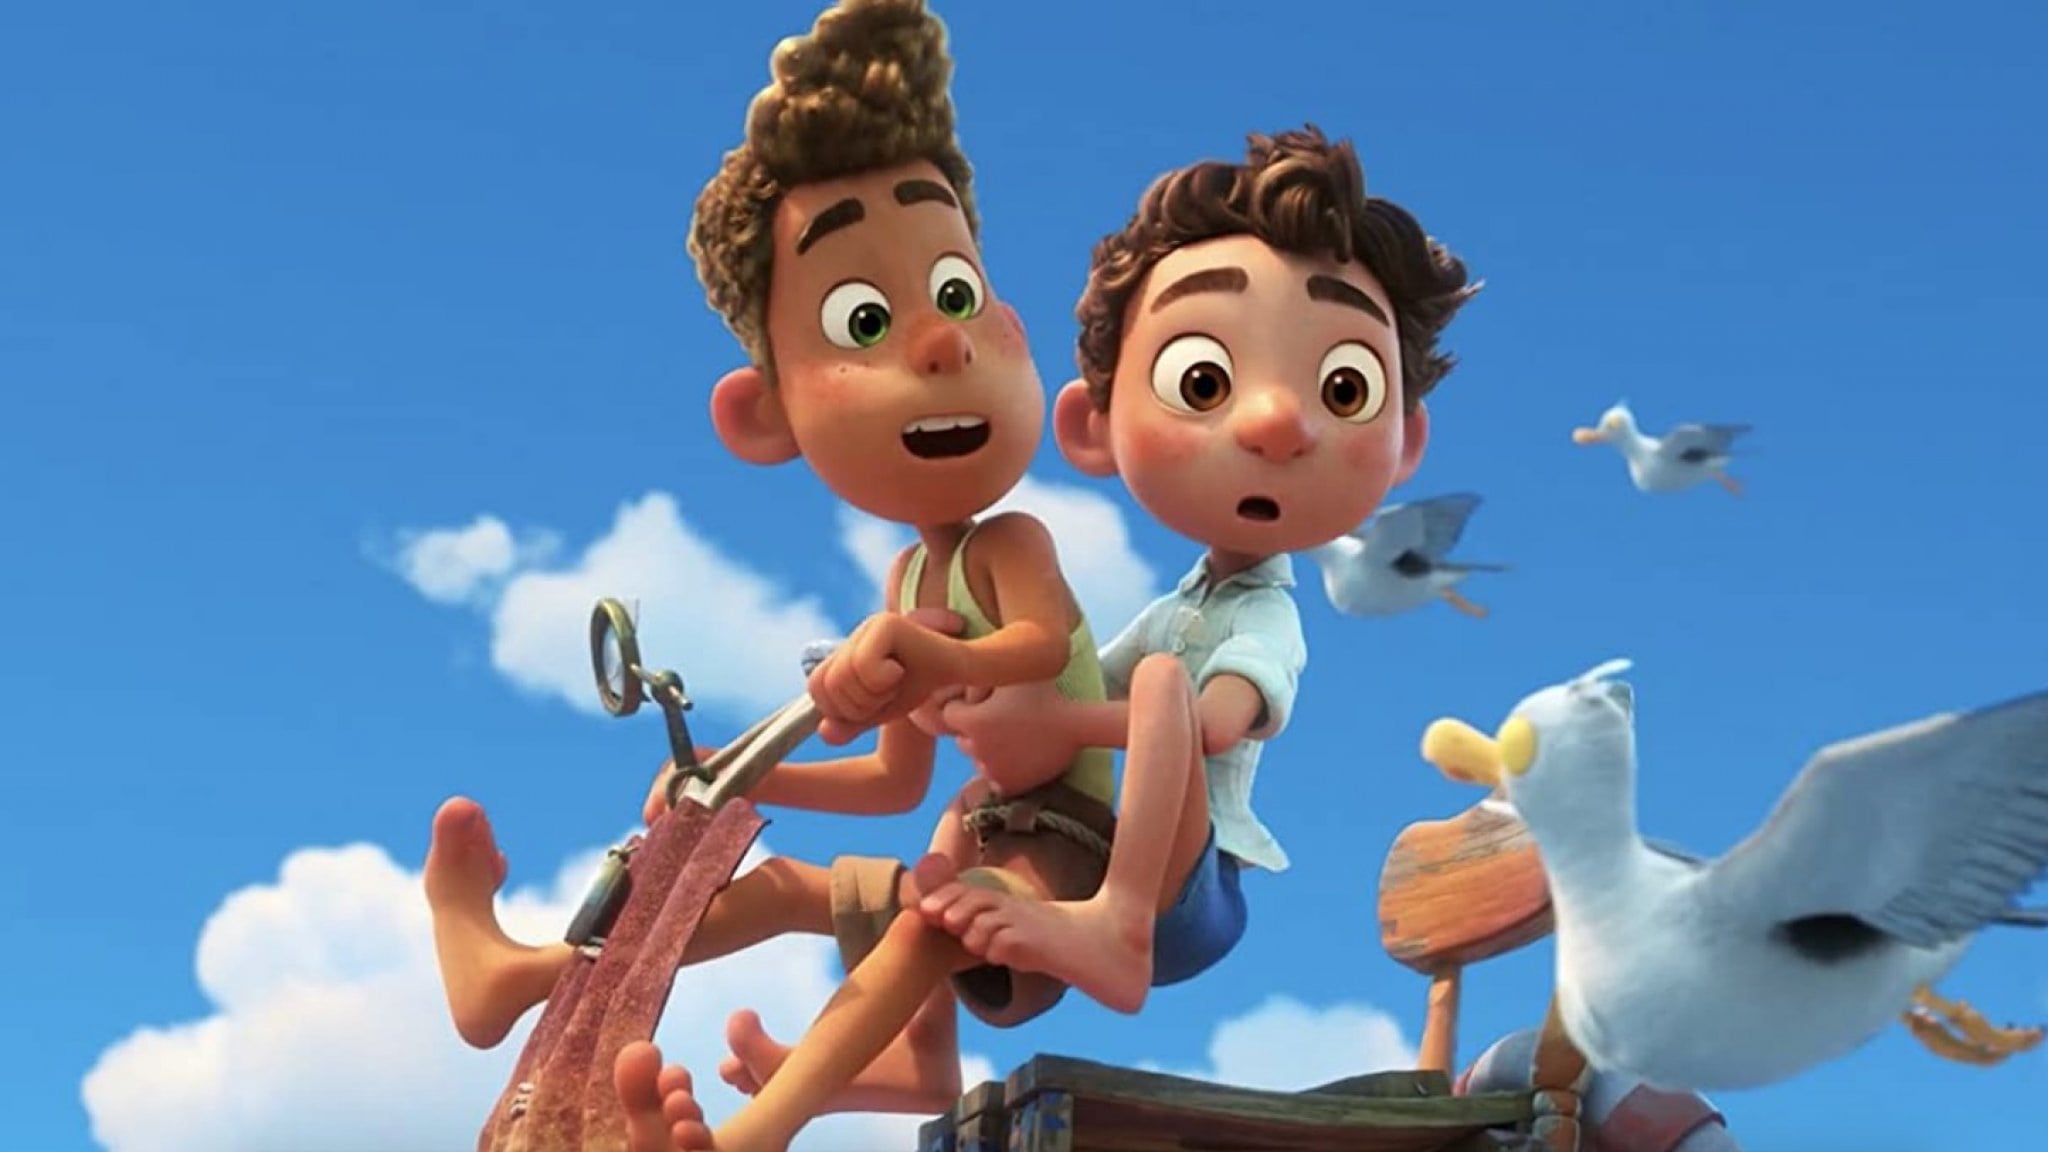 Pixar's Luca, Release Date & What We Know So Far